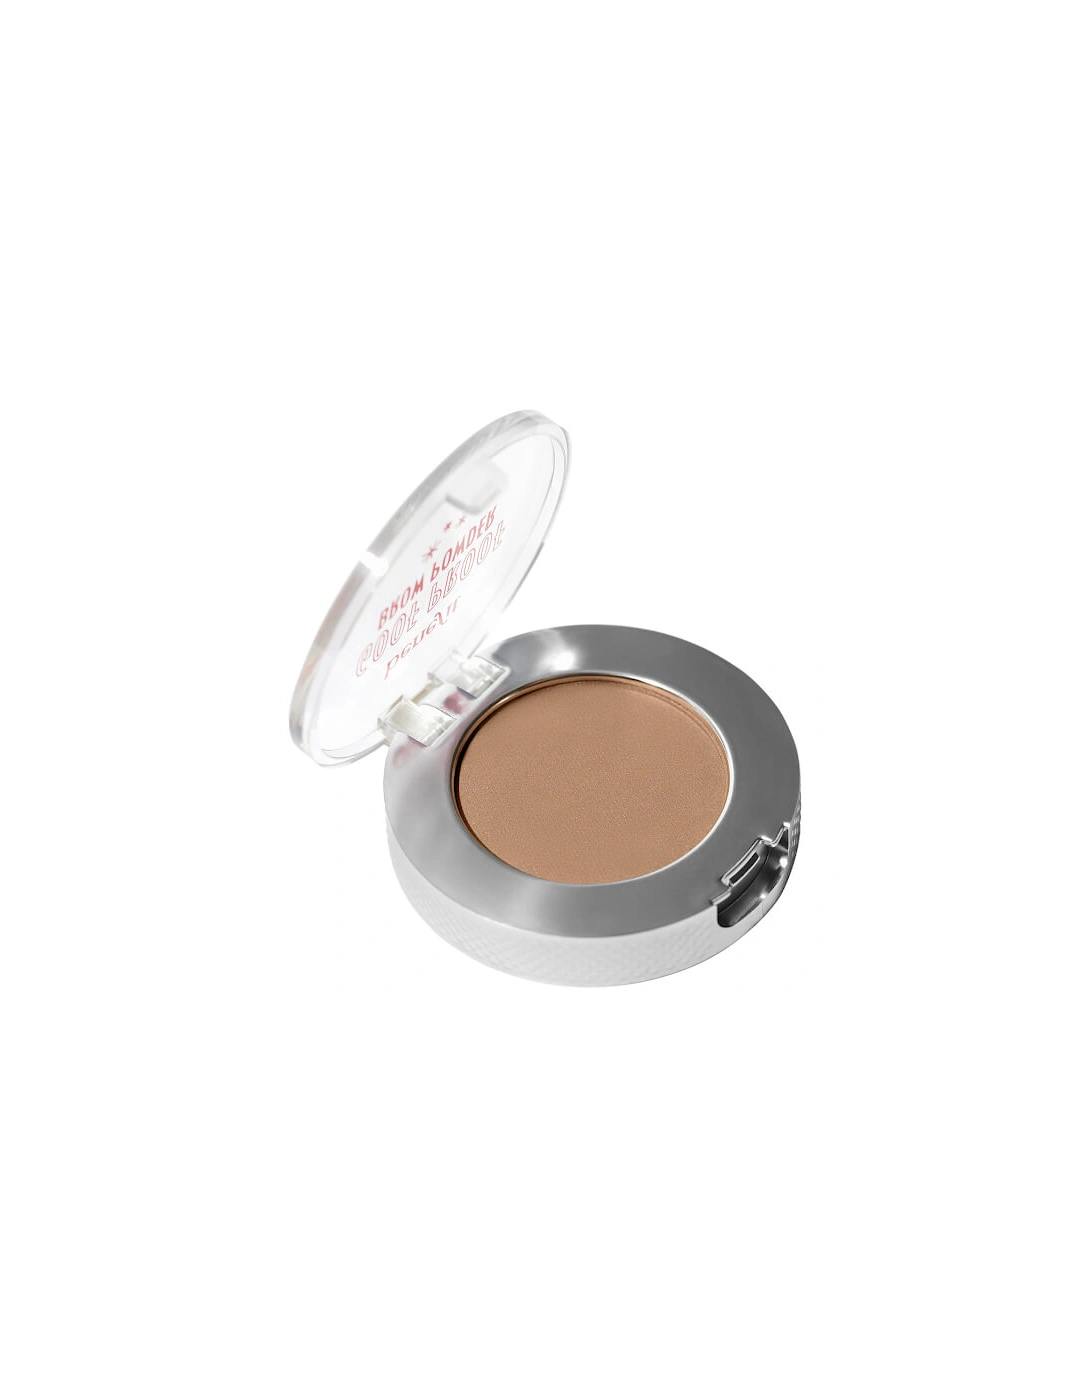 Goof Proof Easy Brow Filling Powder - 02 Warm Golden Blonde, 2 of 1